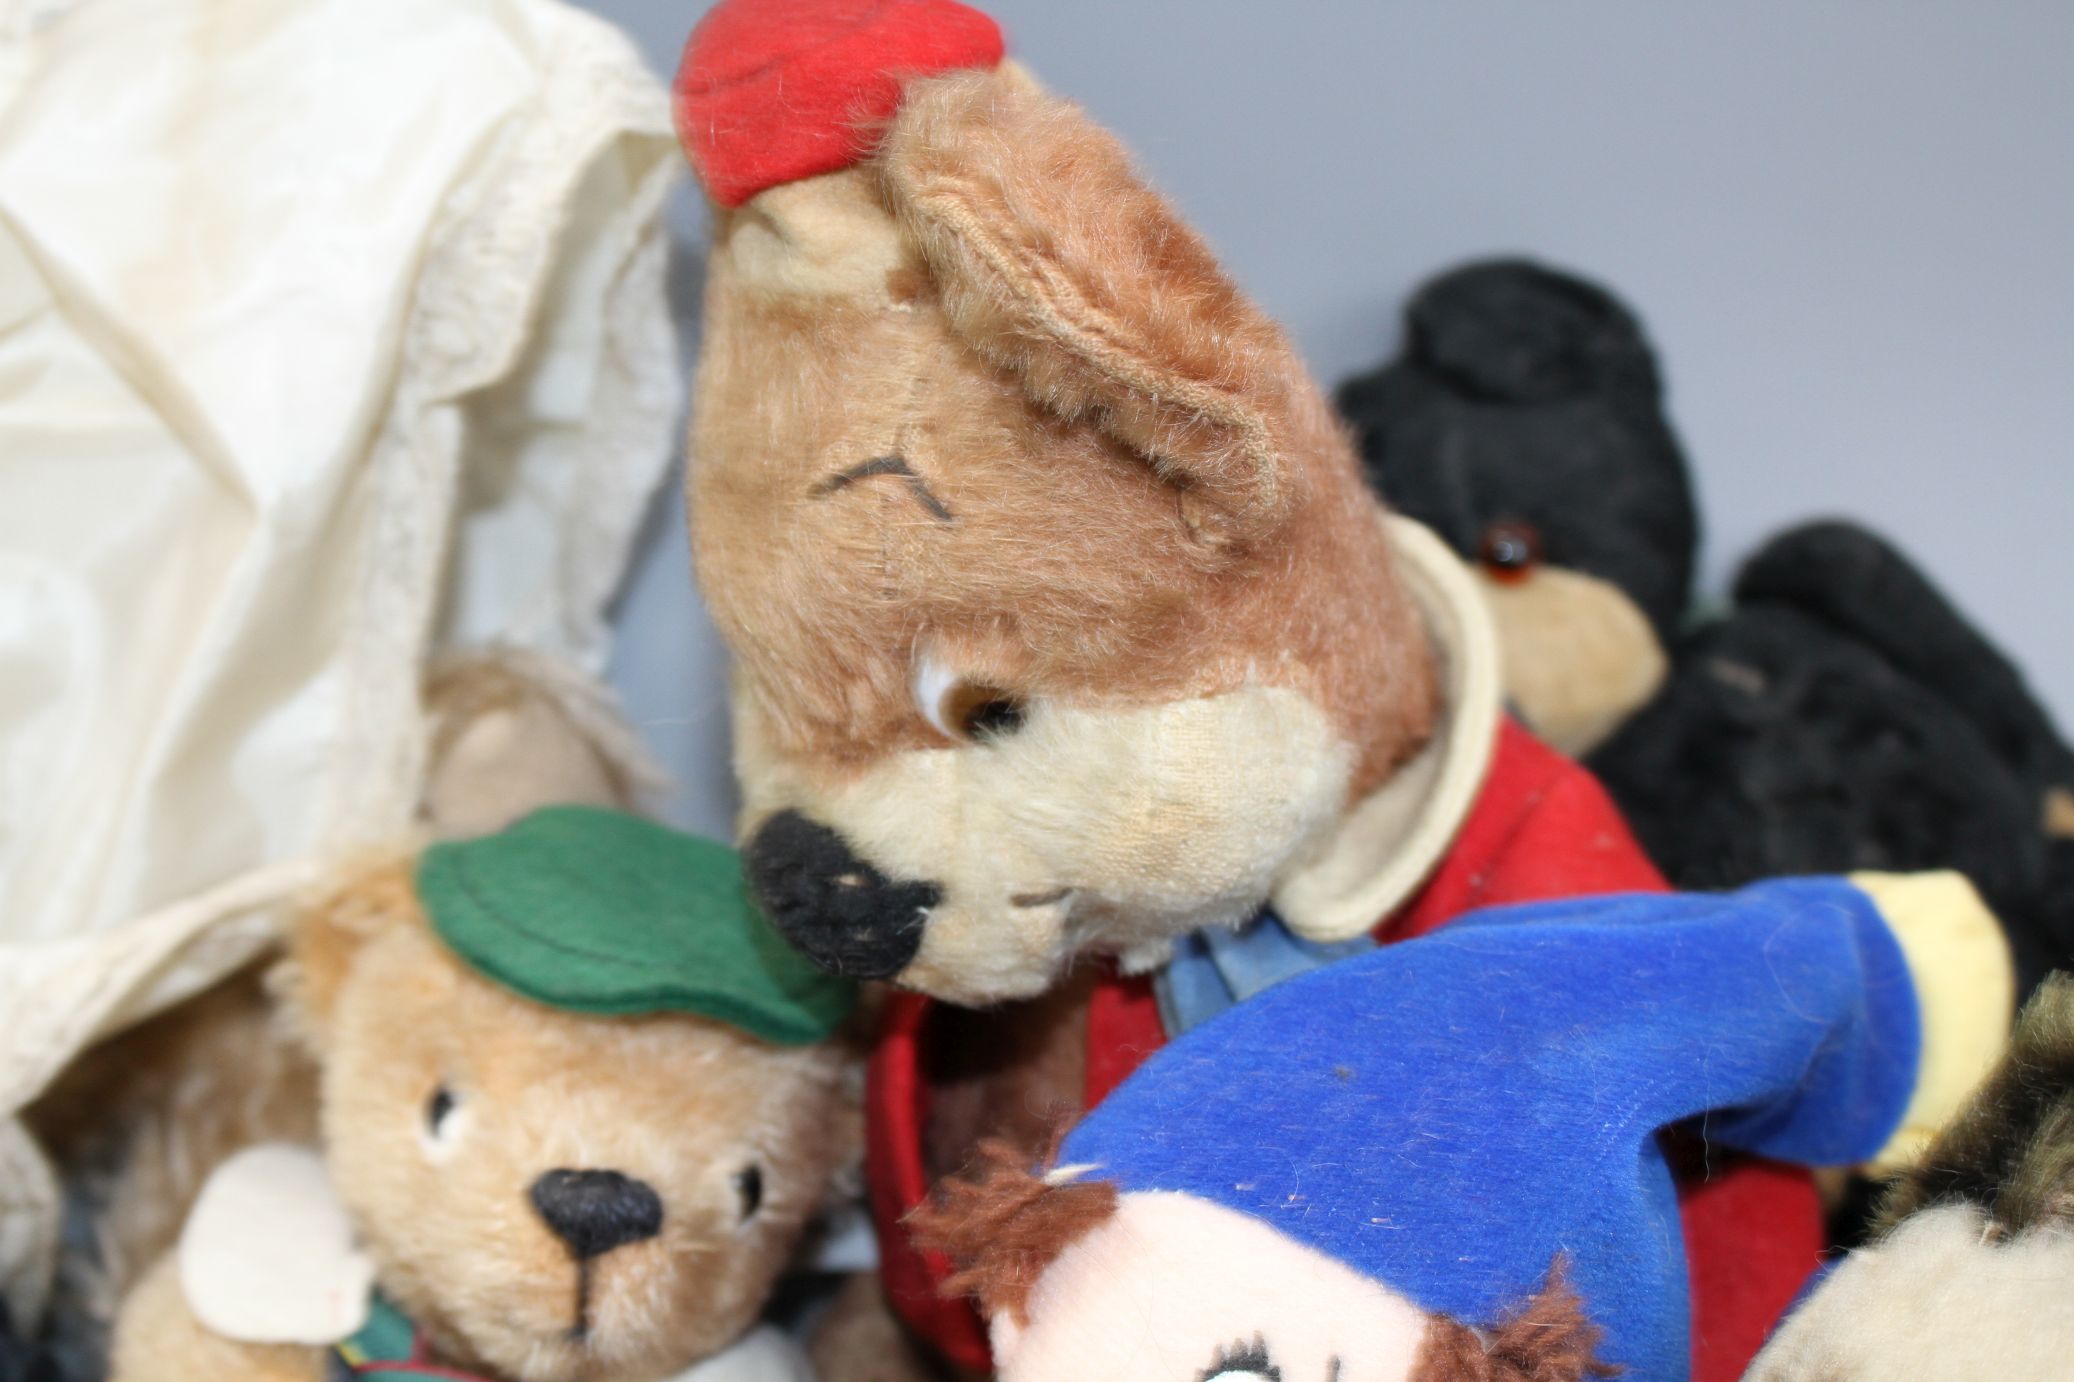 Noddy and Knoll bears, Merrythought Vintage Siamese cat, a Steiff monkey and Carobard character - Image 3 of 7